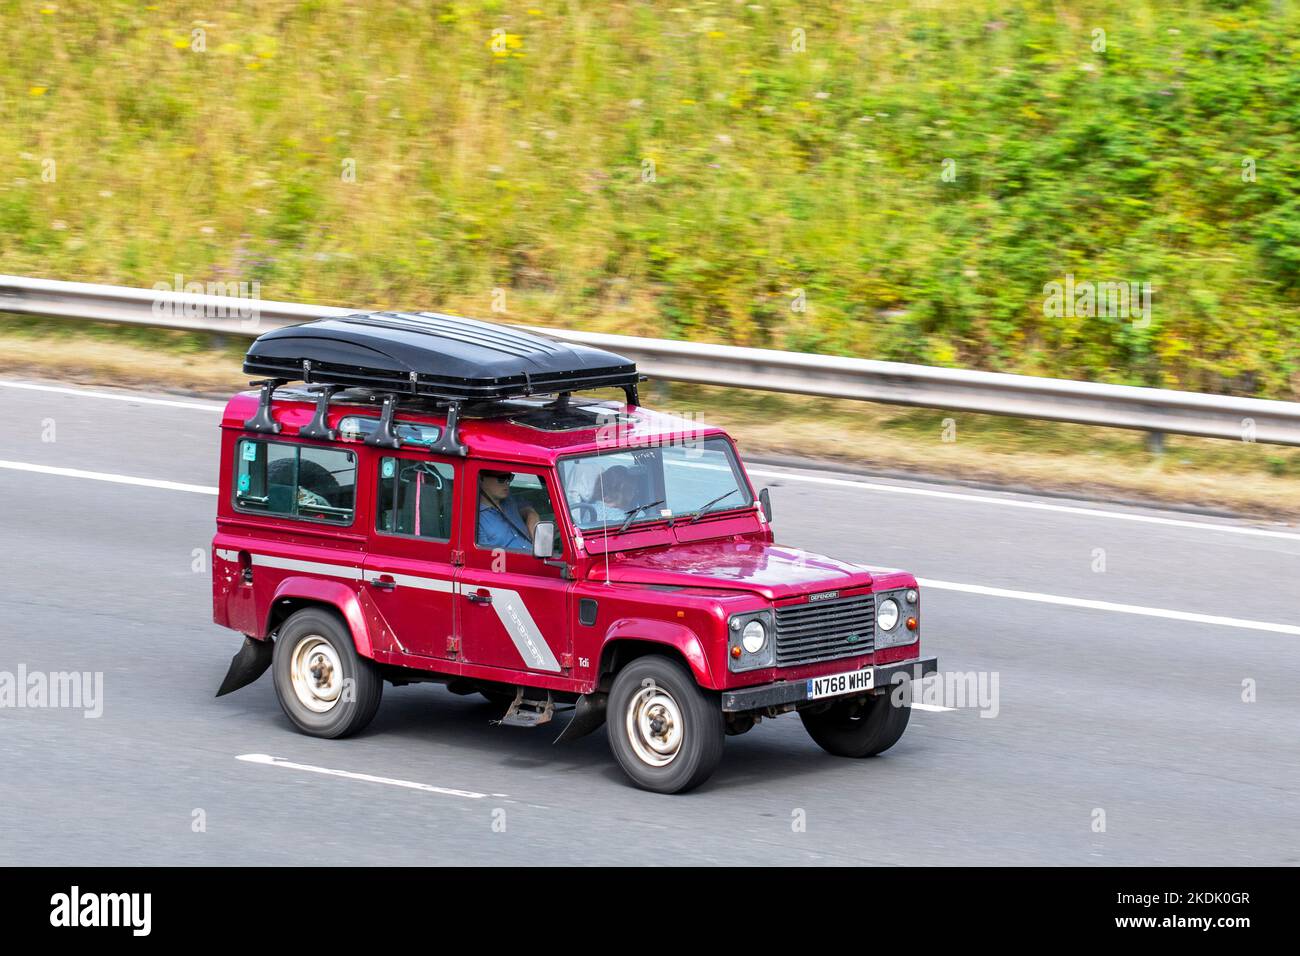 1996, 90s, nineties red Land Rover Stock Photo